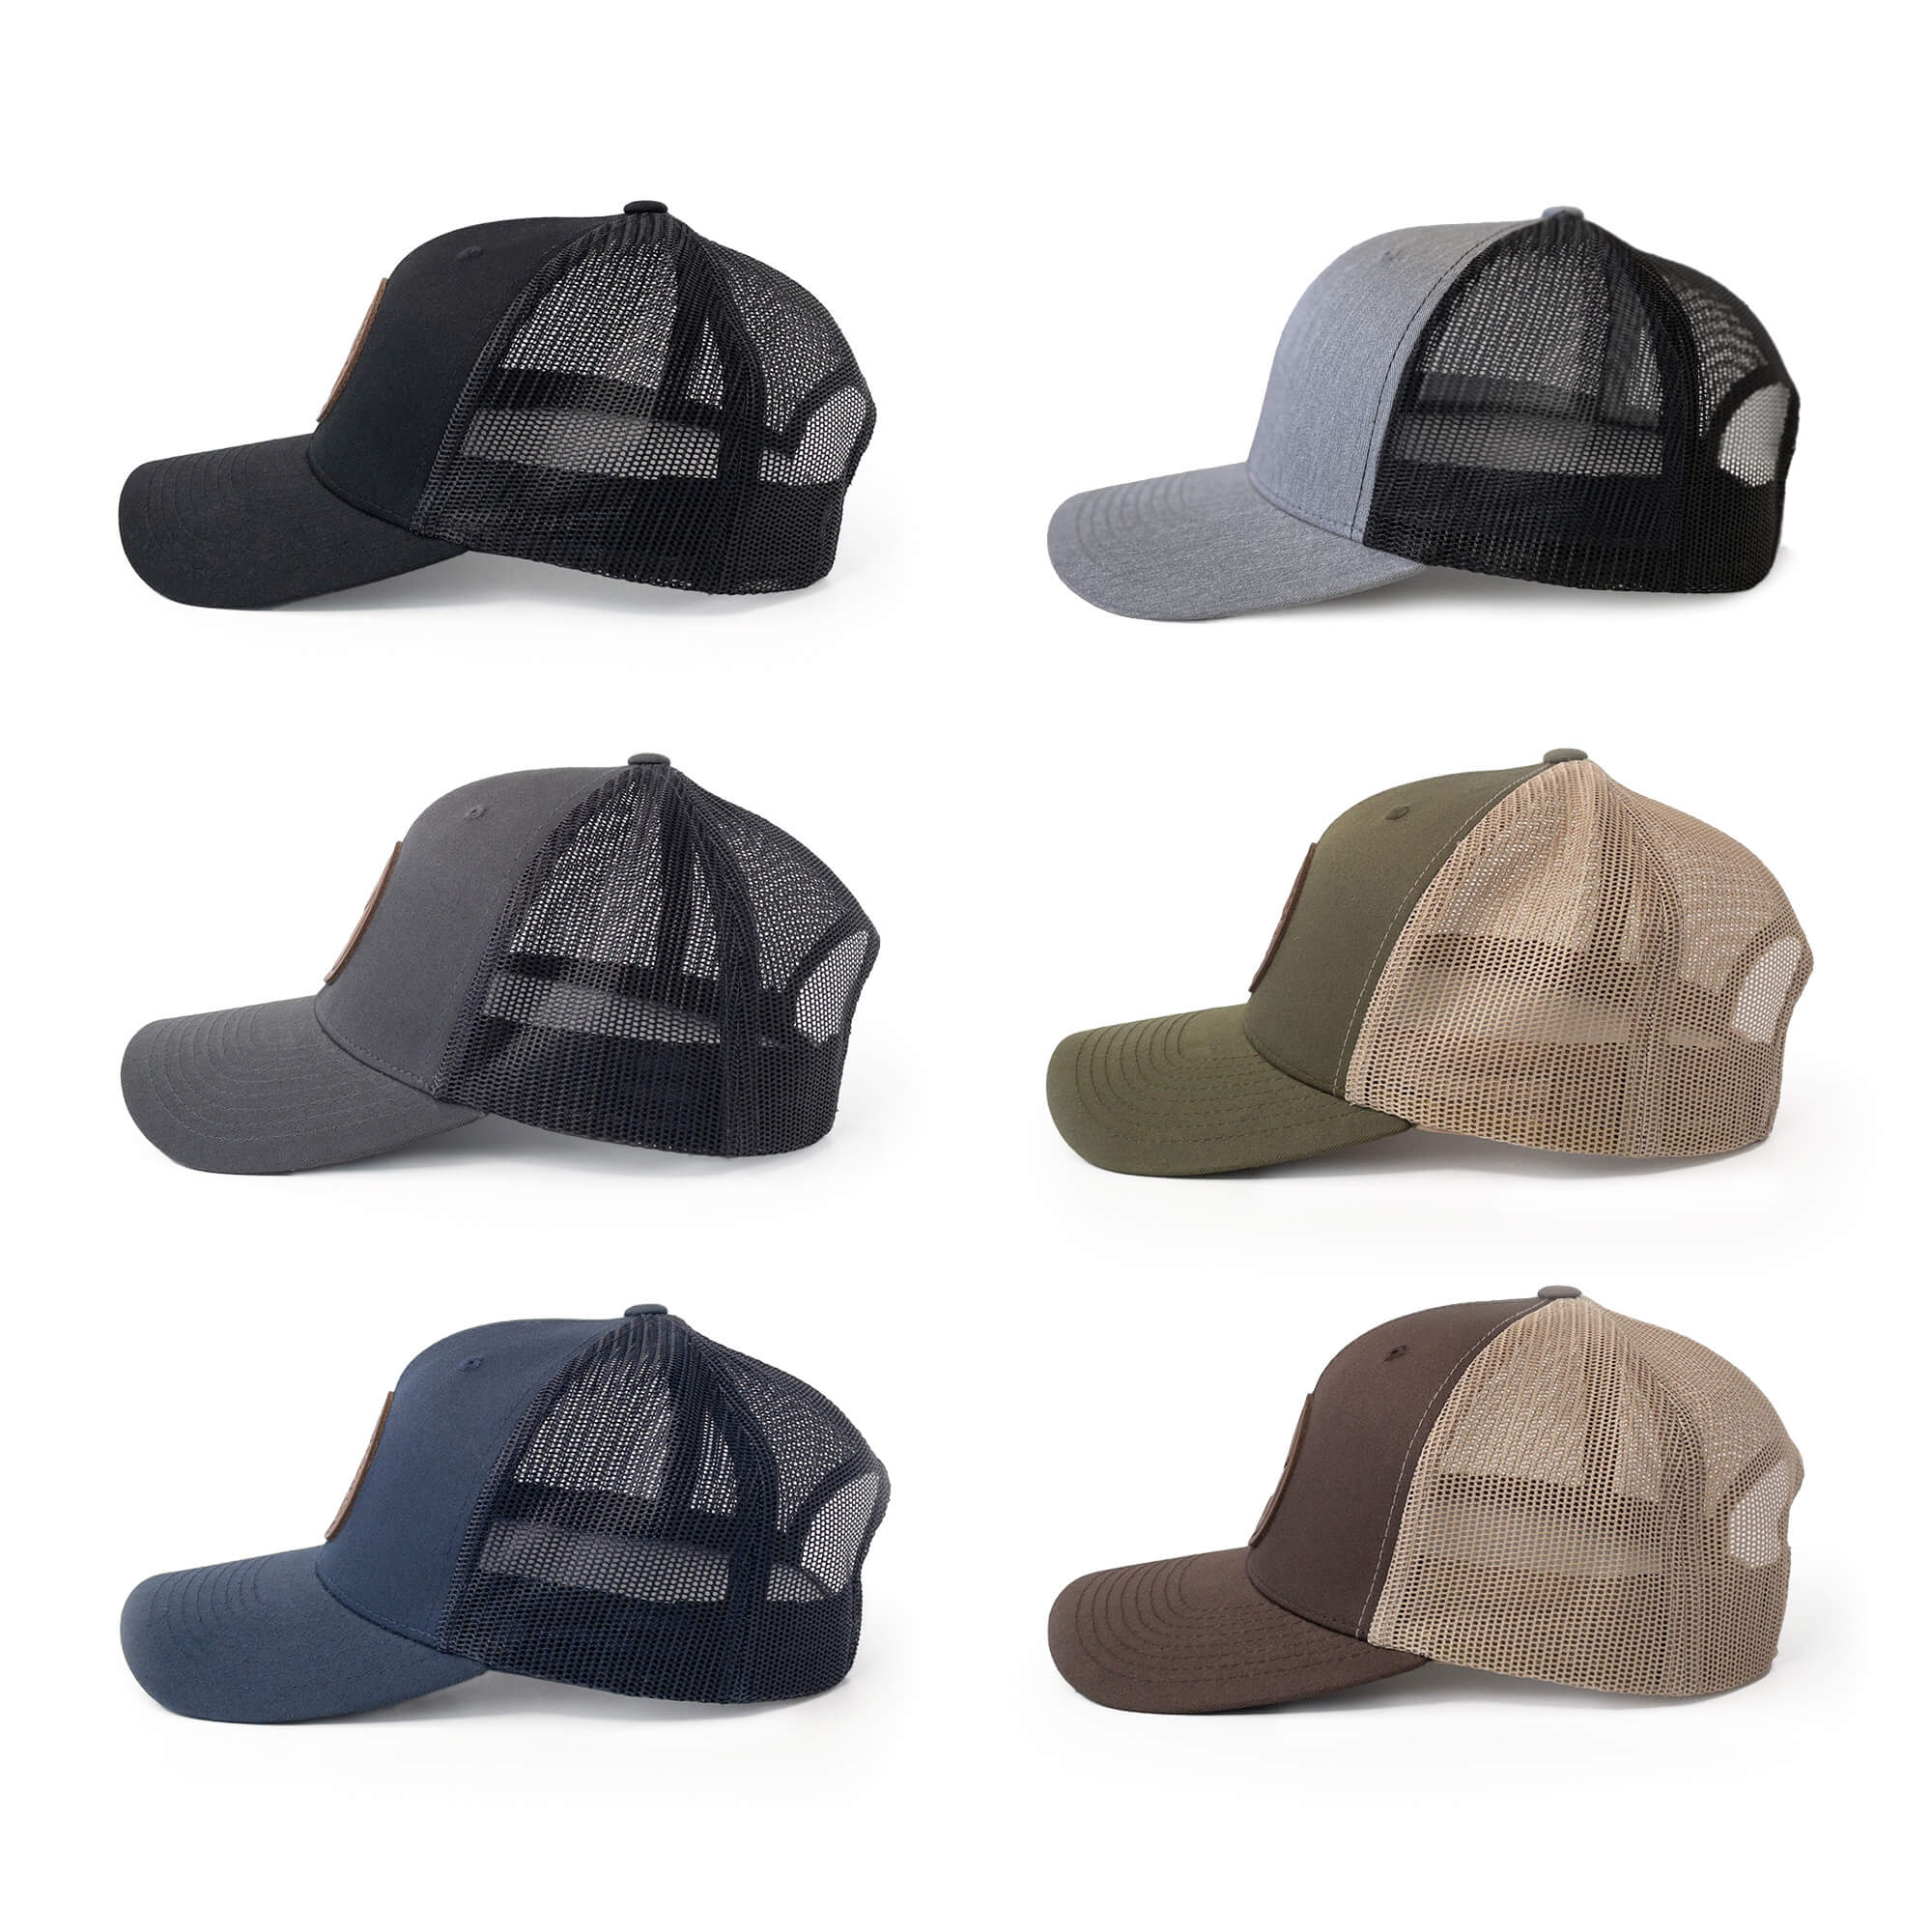 Leather patch trucker hats available in 6 colors | BLACK-002-010, CHARC-002-010, NAVY-002-010, HGREY-002-010, MOSS-002-010, BROWN-002-010